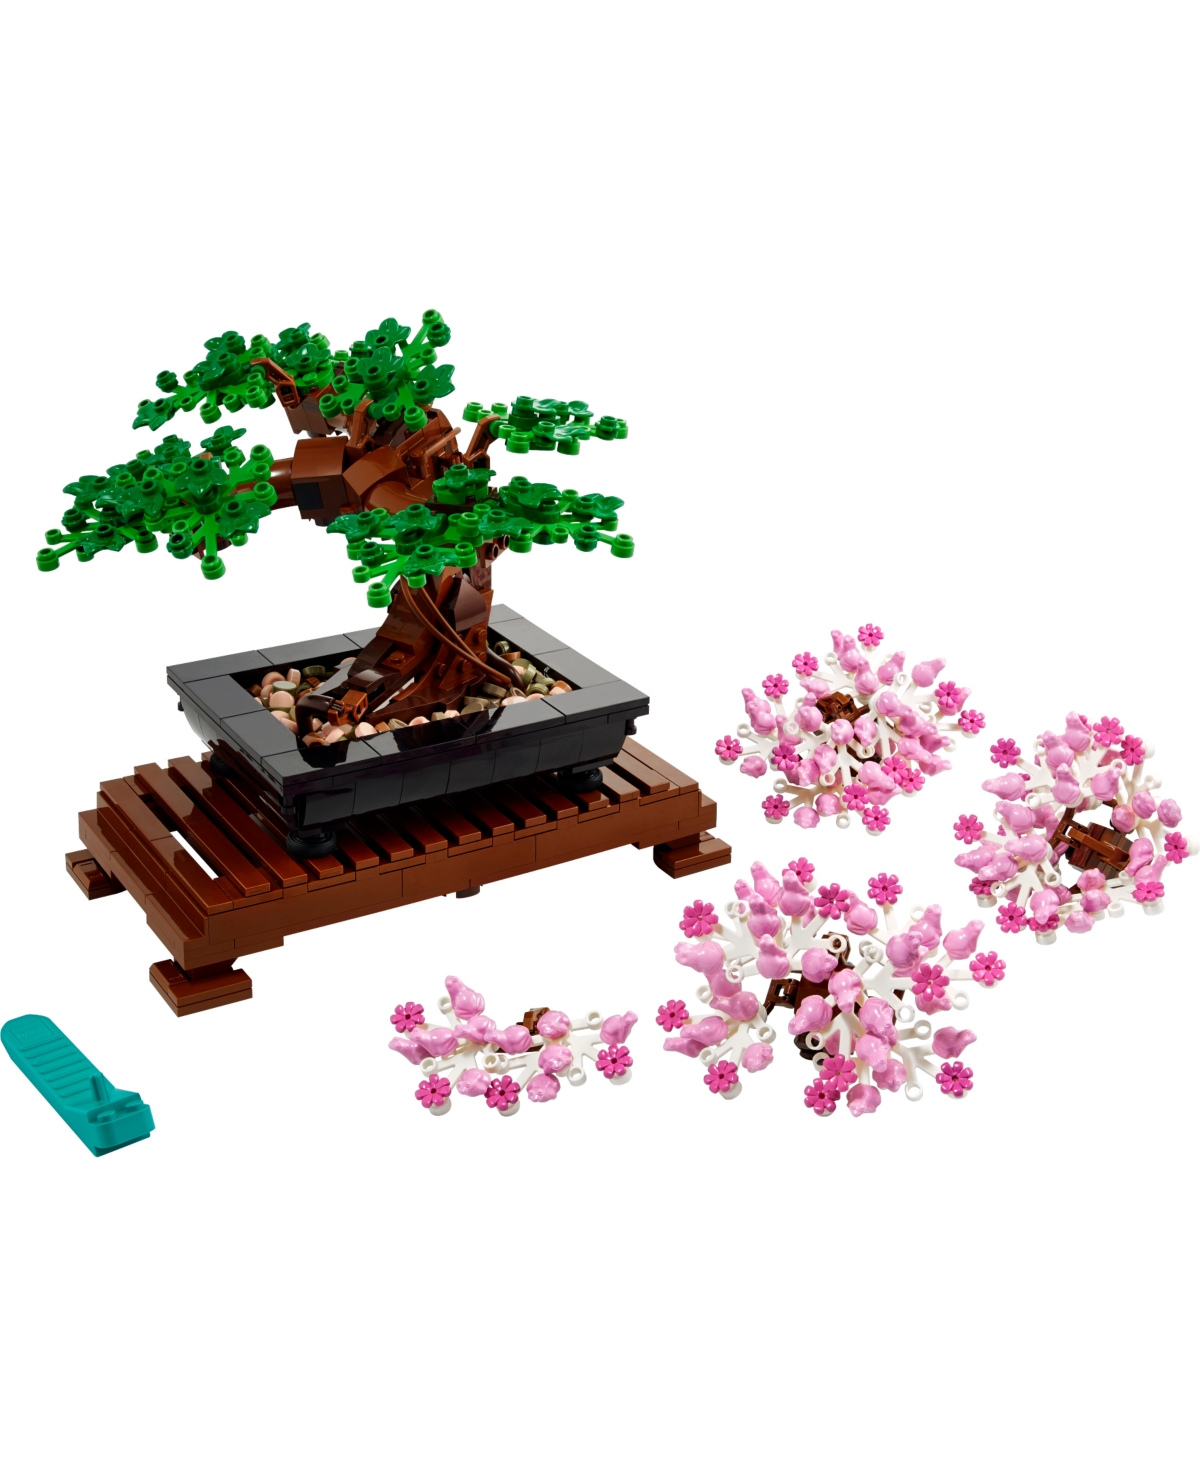 Shop Lego Icons Bonsai Tree 10281 Adult Toy Building Set In No Color